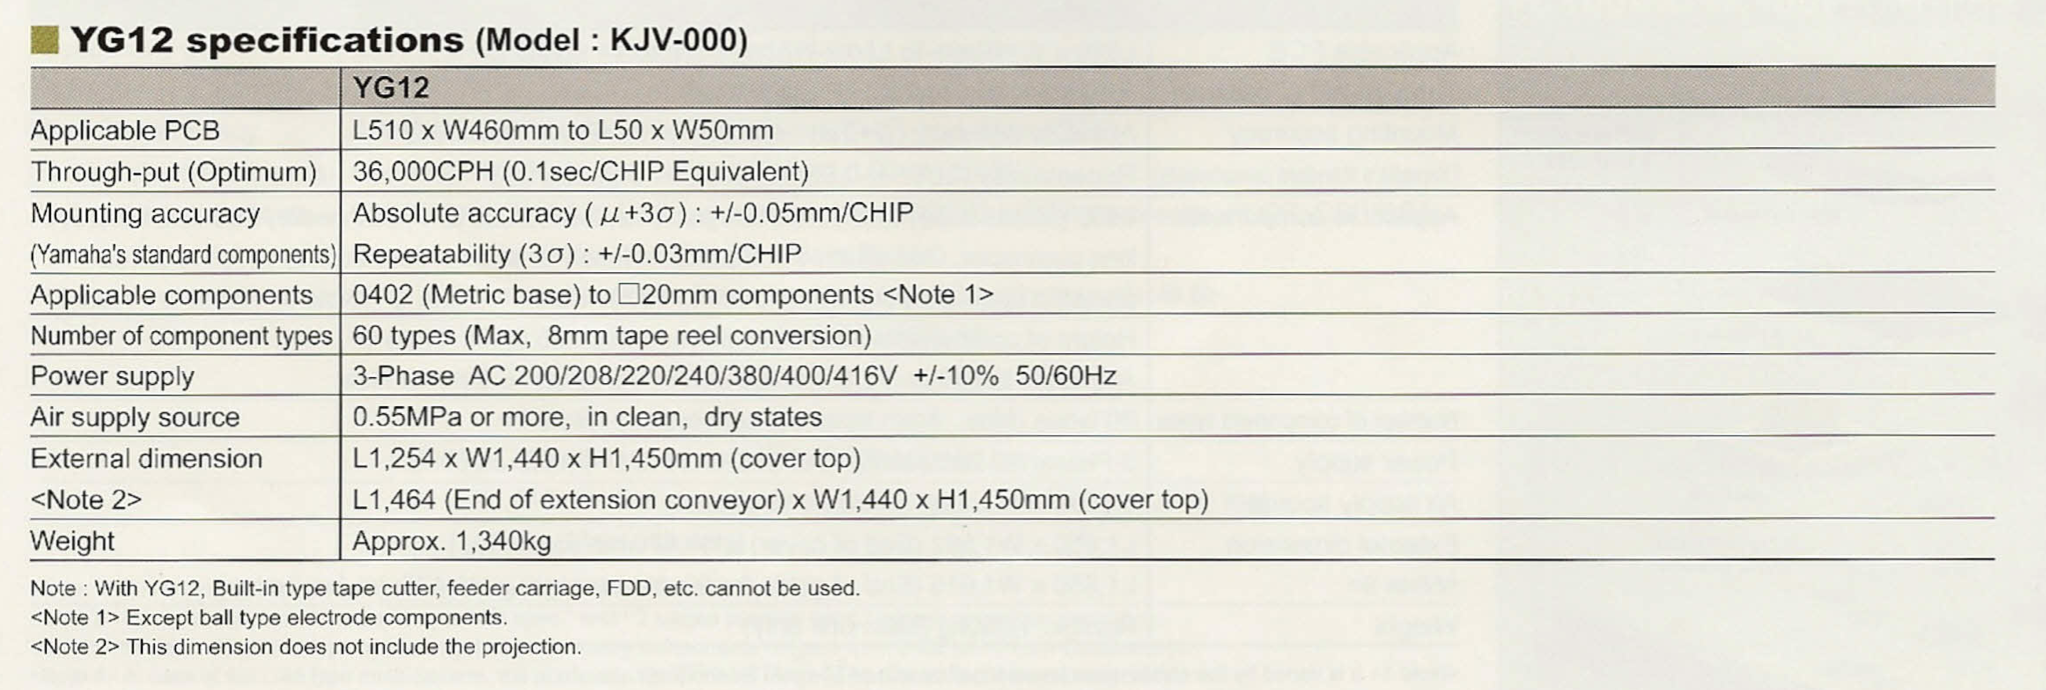 yg12 specifications